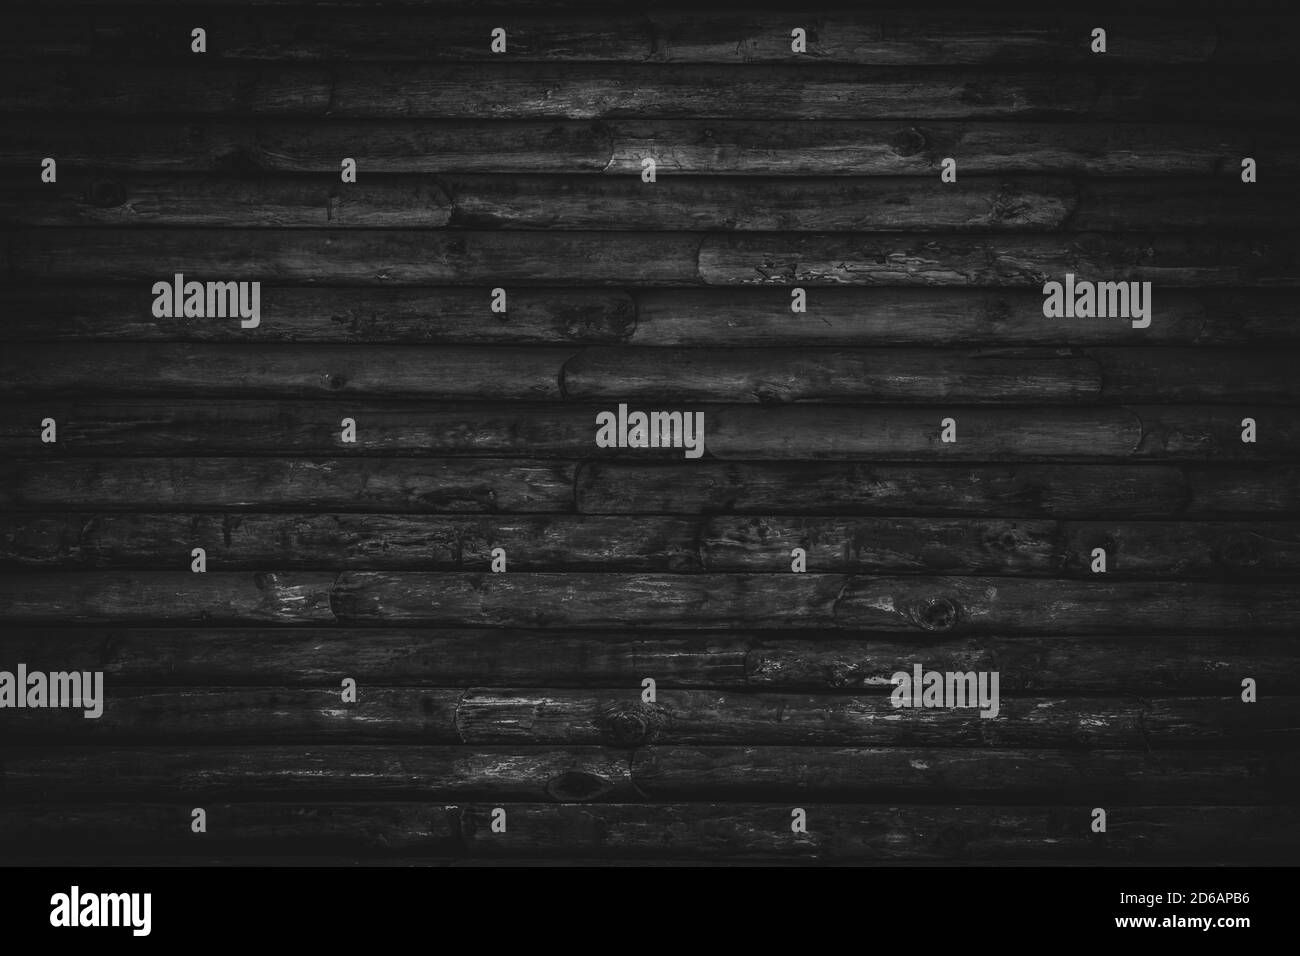 Dark wood plank wall texture background. Black wooden board old natural pattern. Reclaimed old grunge vintage wood wall Paneling texture. Stock Photo